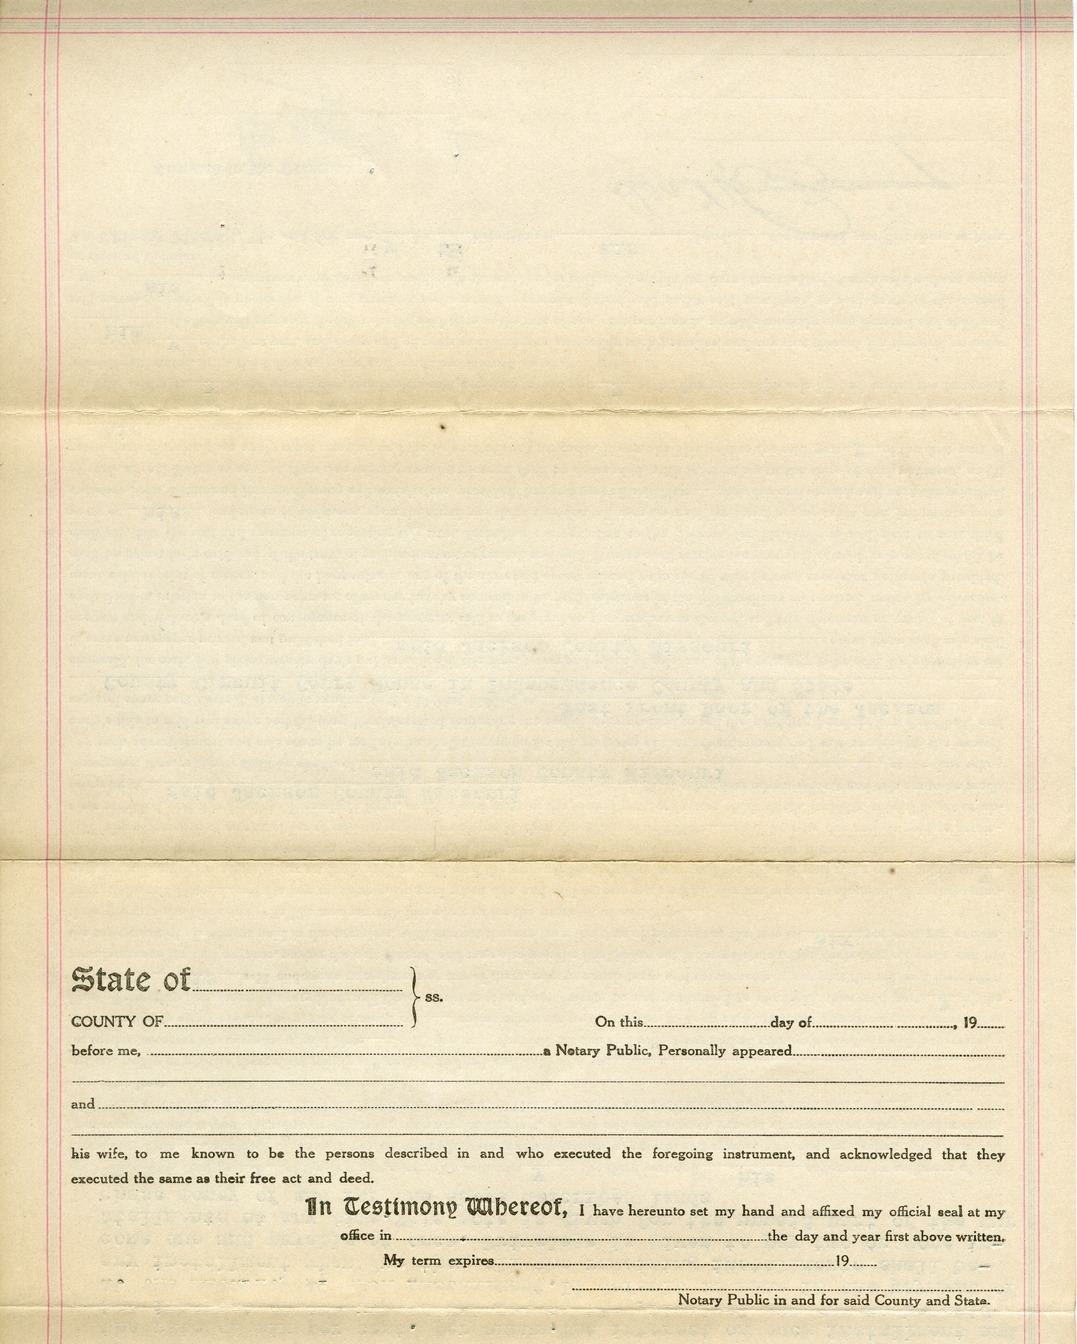 Deed of Trust from Asa K. Browning to Albert M. Ott for William H. Wallace